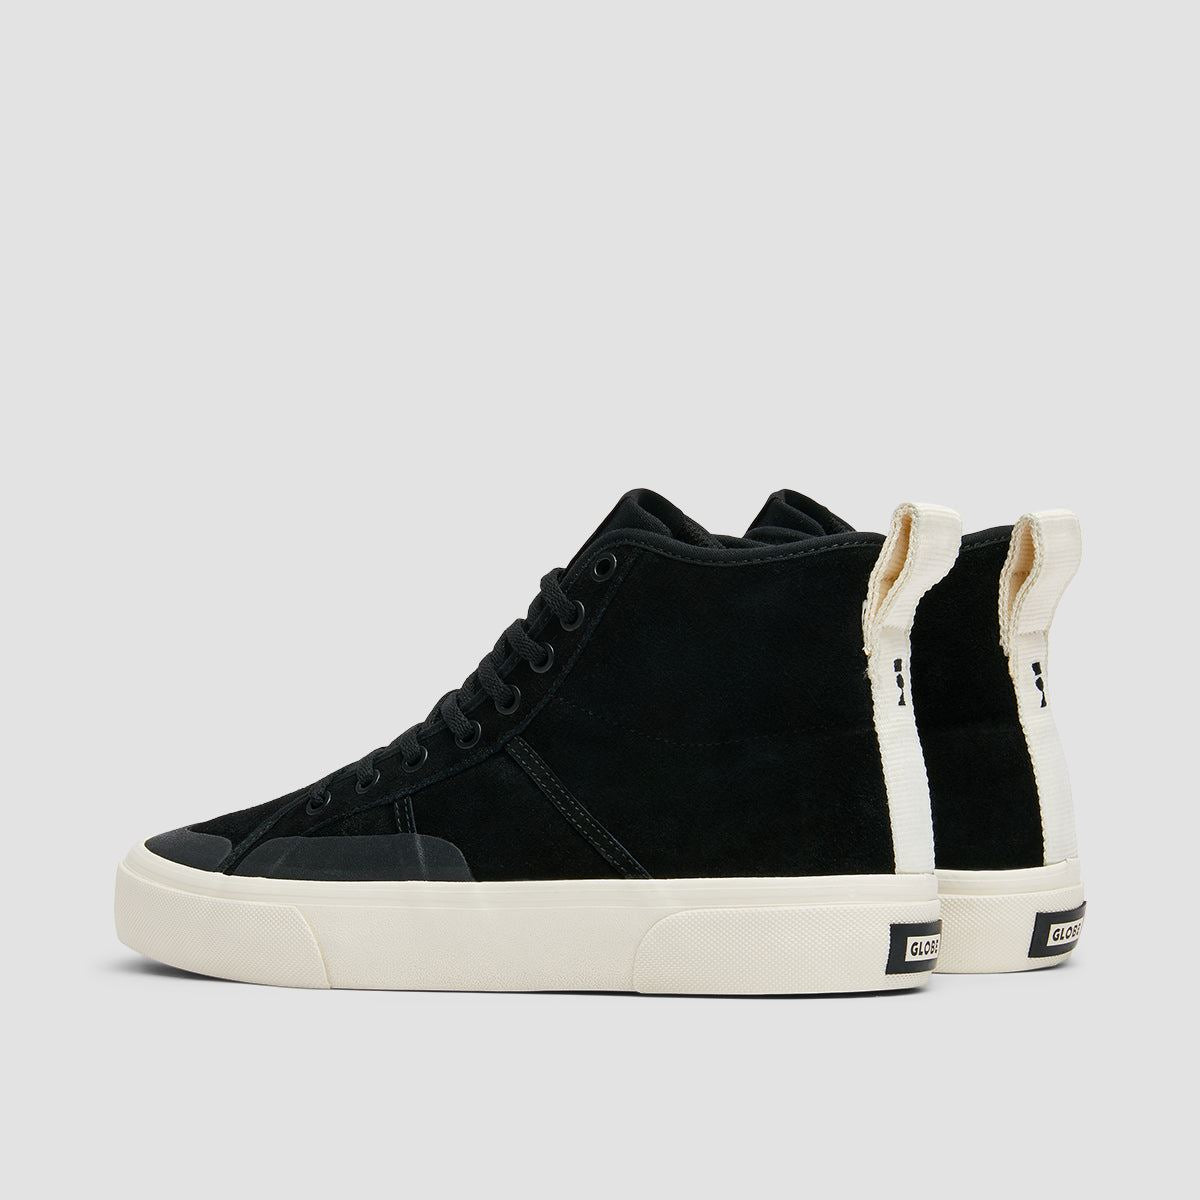 Globe Los Angered II High Top Shoes - Black/Antique